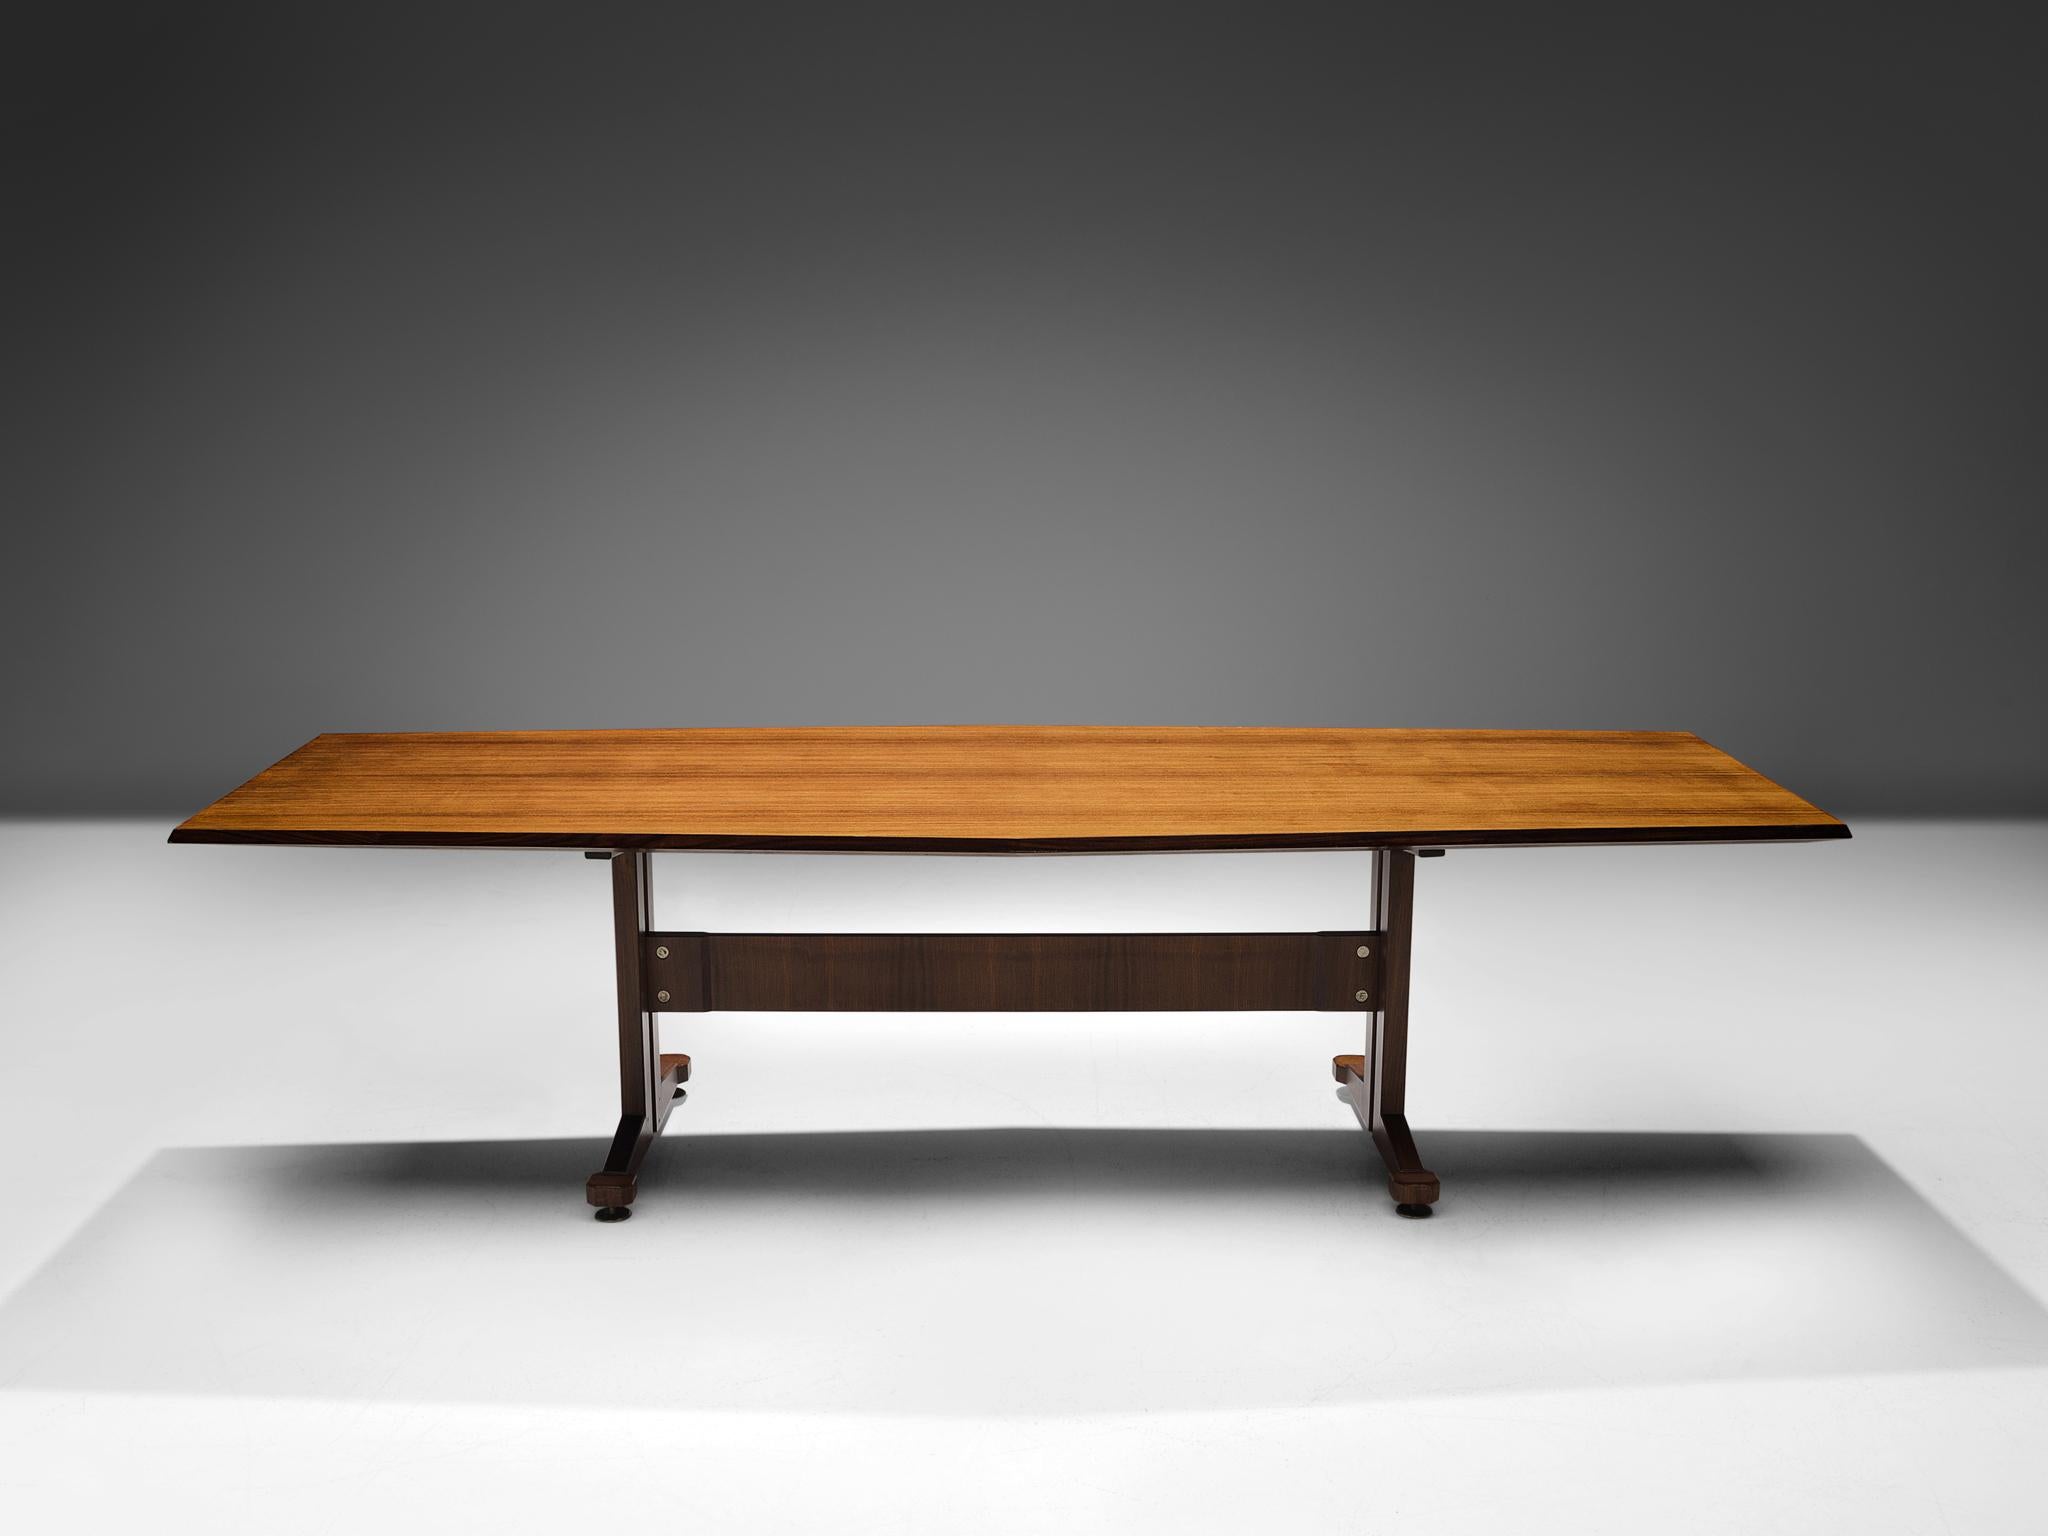 Dining table or conference table, teak, metal, Italy, 1960s.

This large boat-shaped dining or conference table has a teak wood top which shows the beautiful grain of the material. This lays on a construction in a functionalist style. Metal details